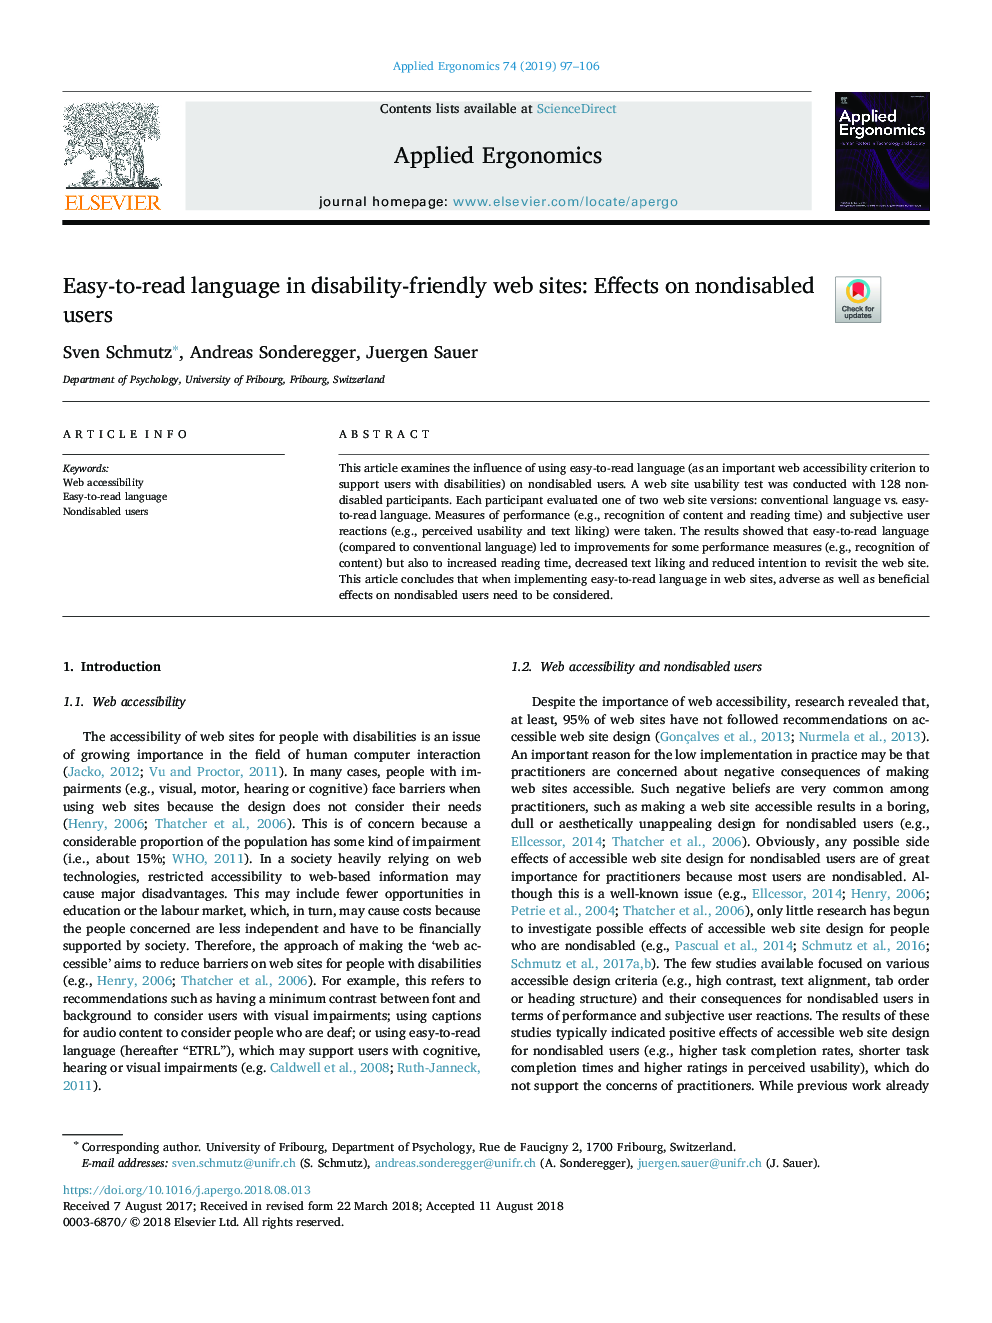 Easy-to-read language in disability-friendly web sites: Effects on nondisabled users